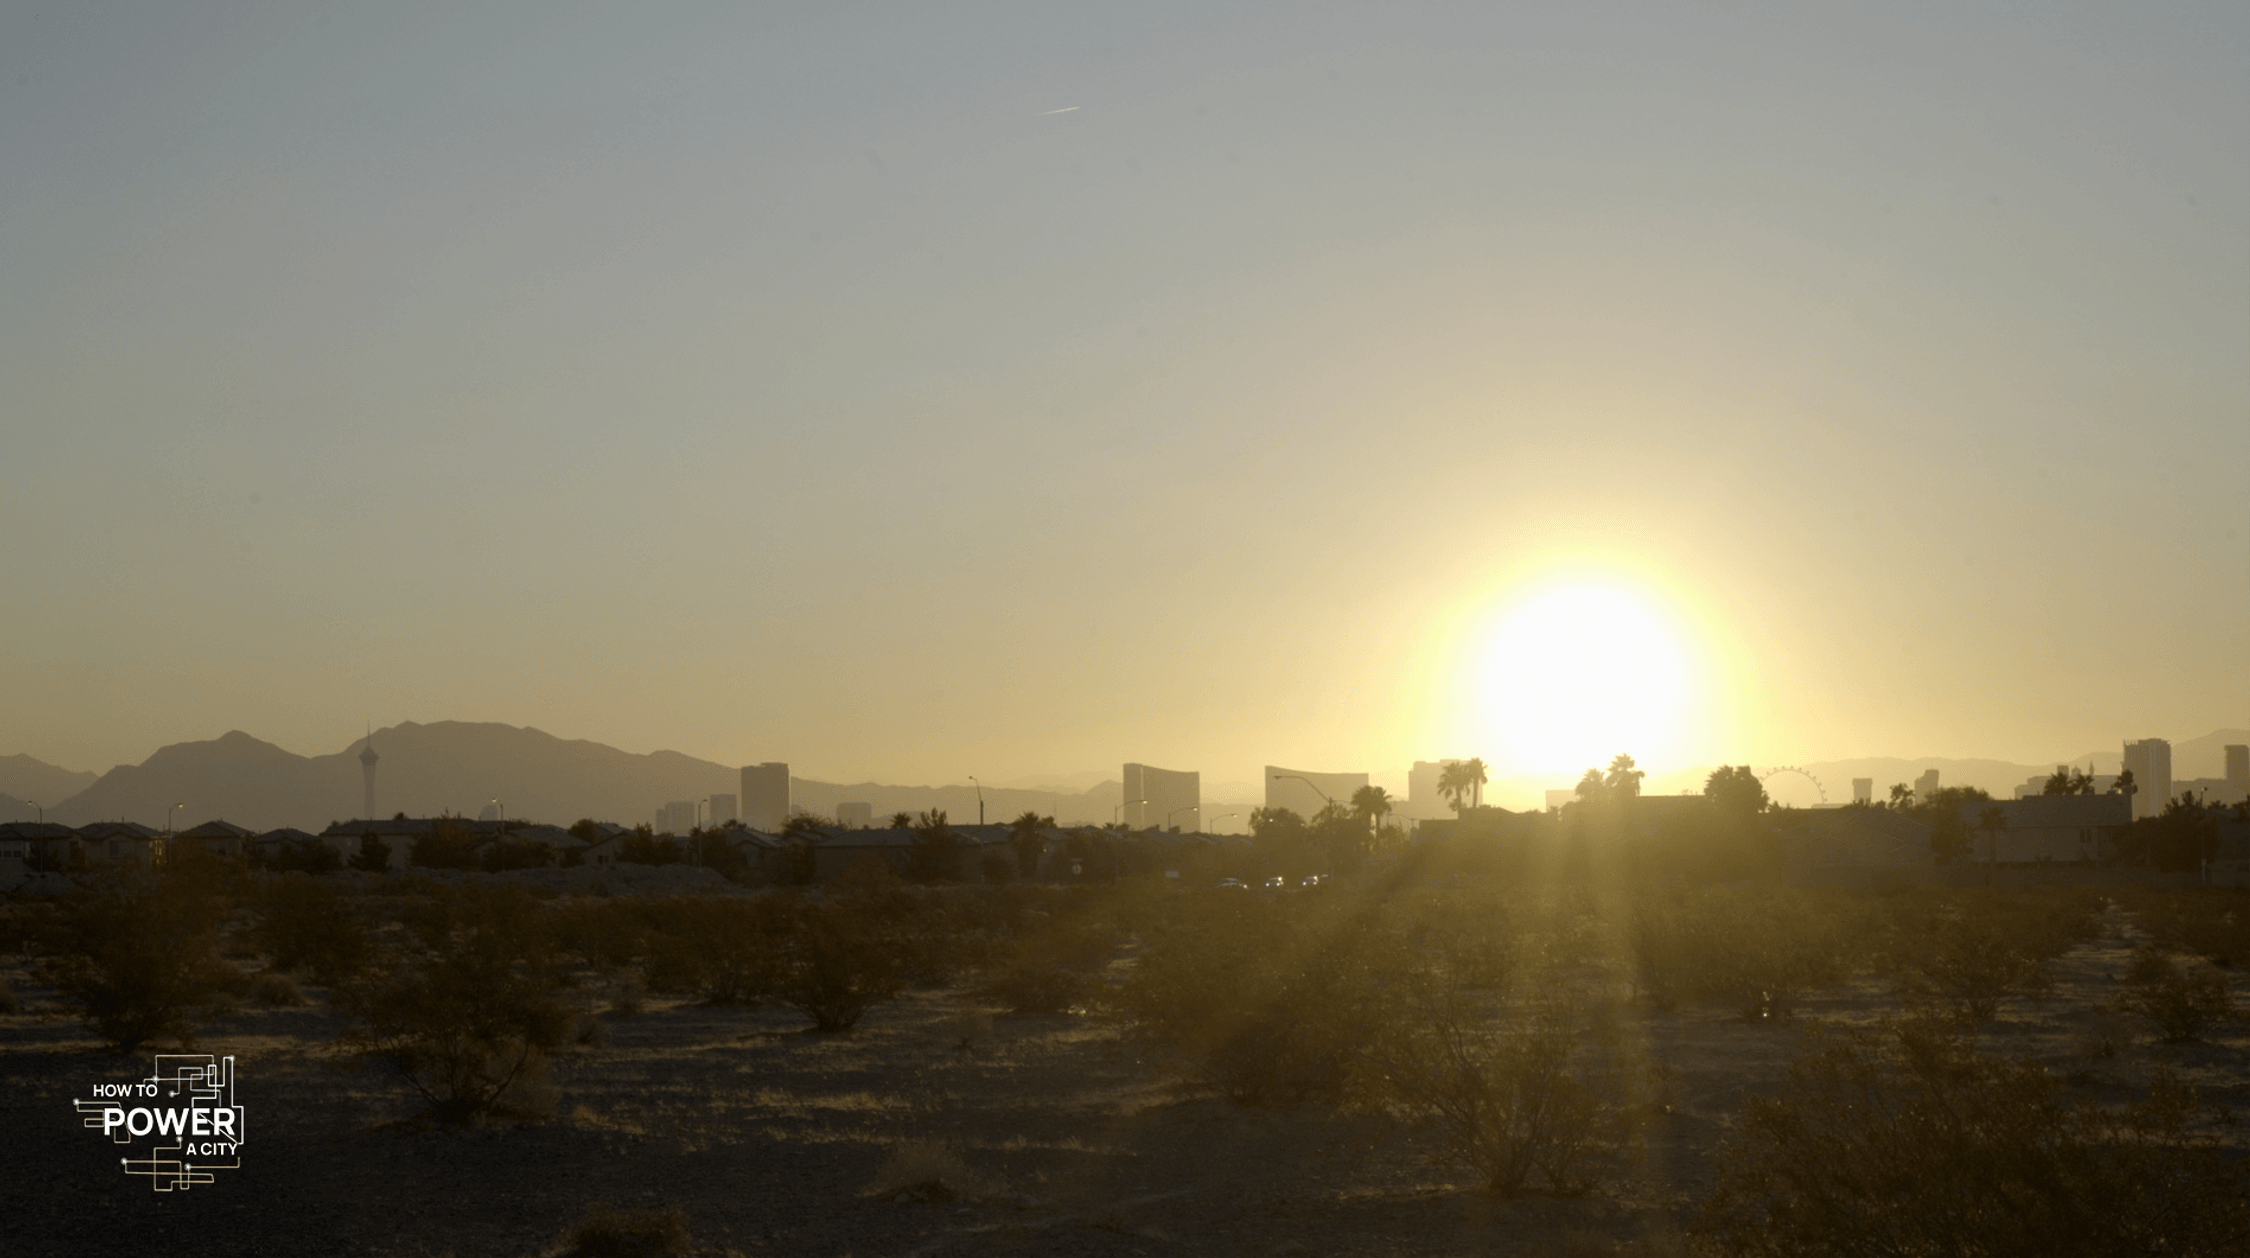 A sunset over a desert cityscape with the sun low in the sky, casting a warm glow and creating a silhouette of the mountains in the background. There are outlines of buildings and palm trees against the light, and the foreground shows arid terrain with sparse vegetation typical of a desert. In the lower left corner, there's text that reads "HOW TO POWER A CITY," suggesting the image may be related to a documentary or educational content focusing on urban energy topics. The sky above is clear with minimal clouds, allowing the sunlight to dominate the scene.